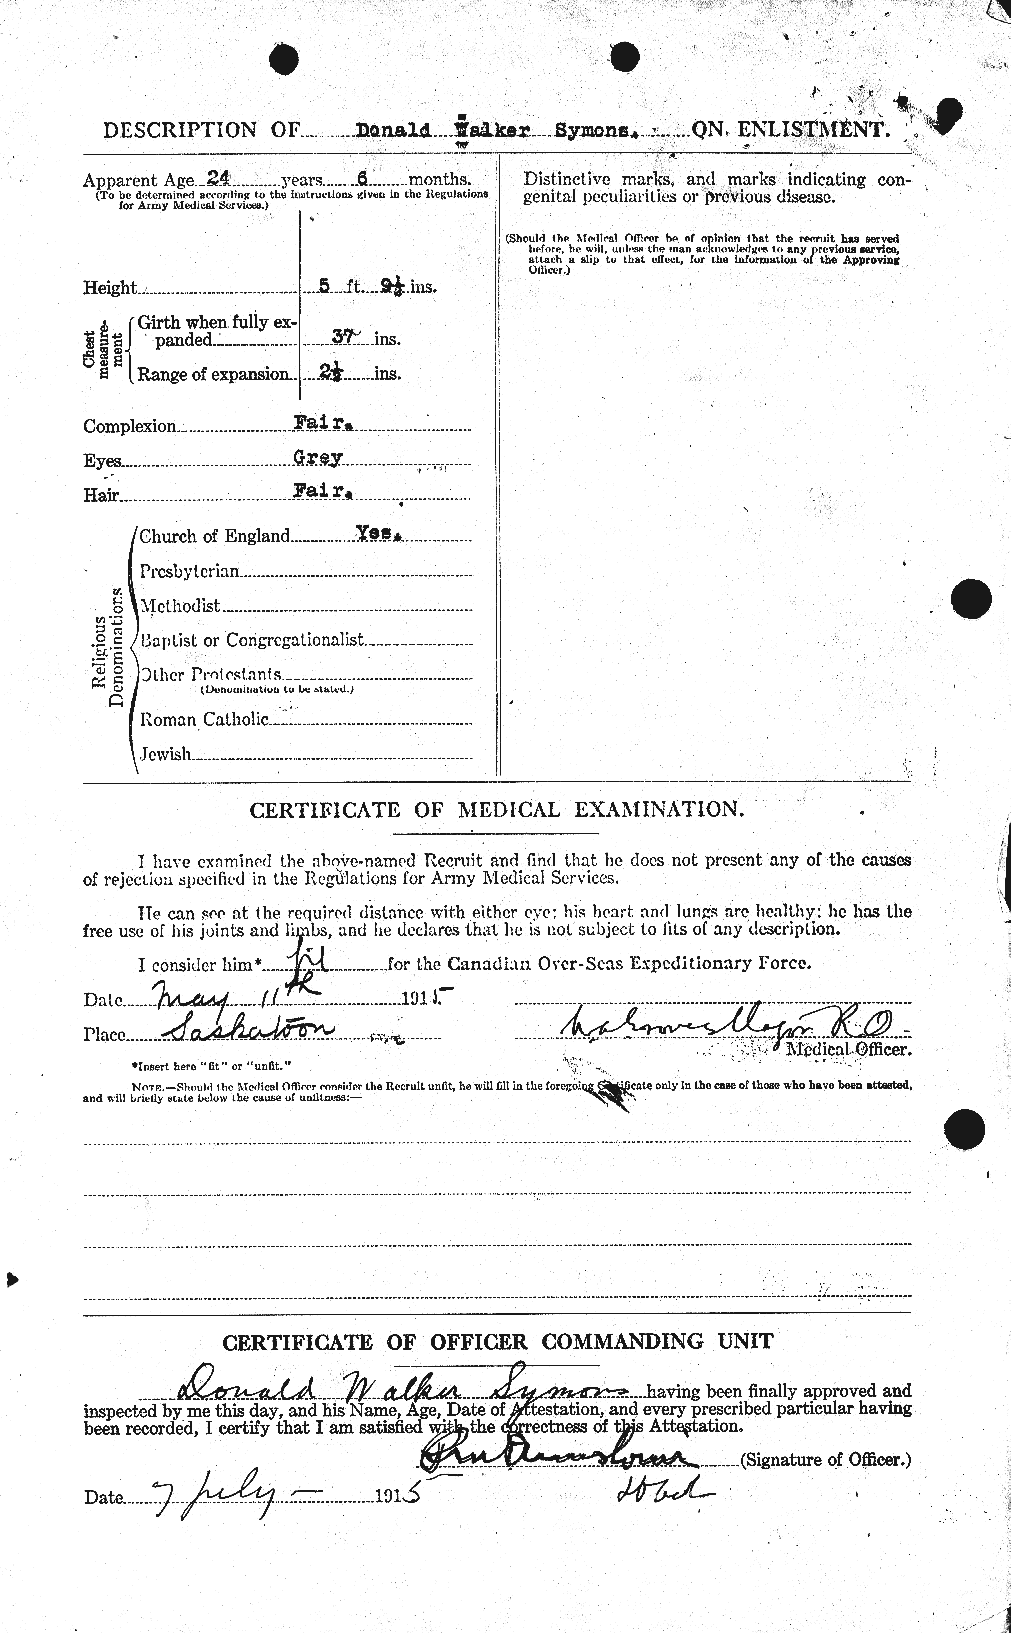 Personnel Records of the First World War - CEF 129174b